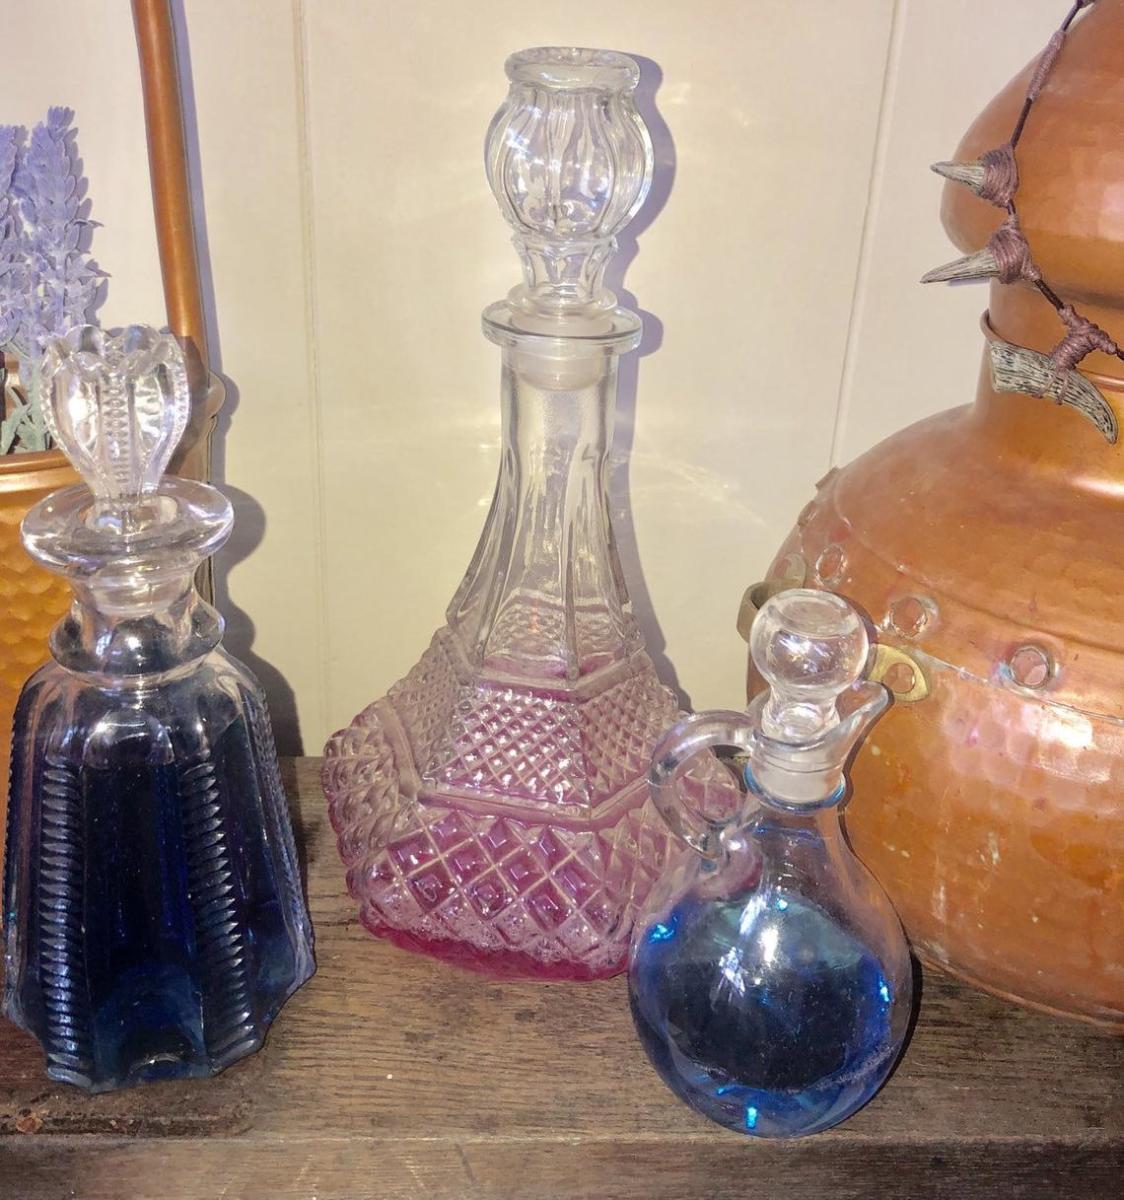 Wine carafes or decanters now have a secondary use in potion bottles, alchemy labs are becoming trendy home decor.